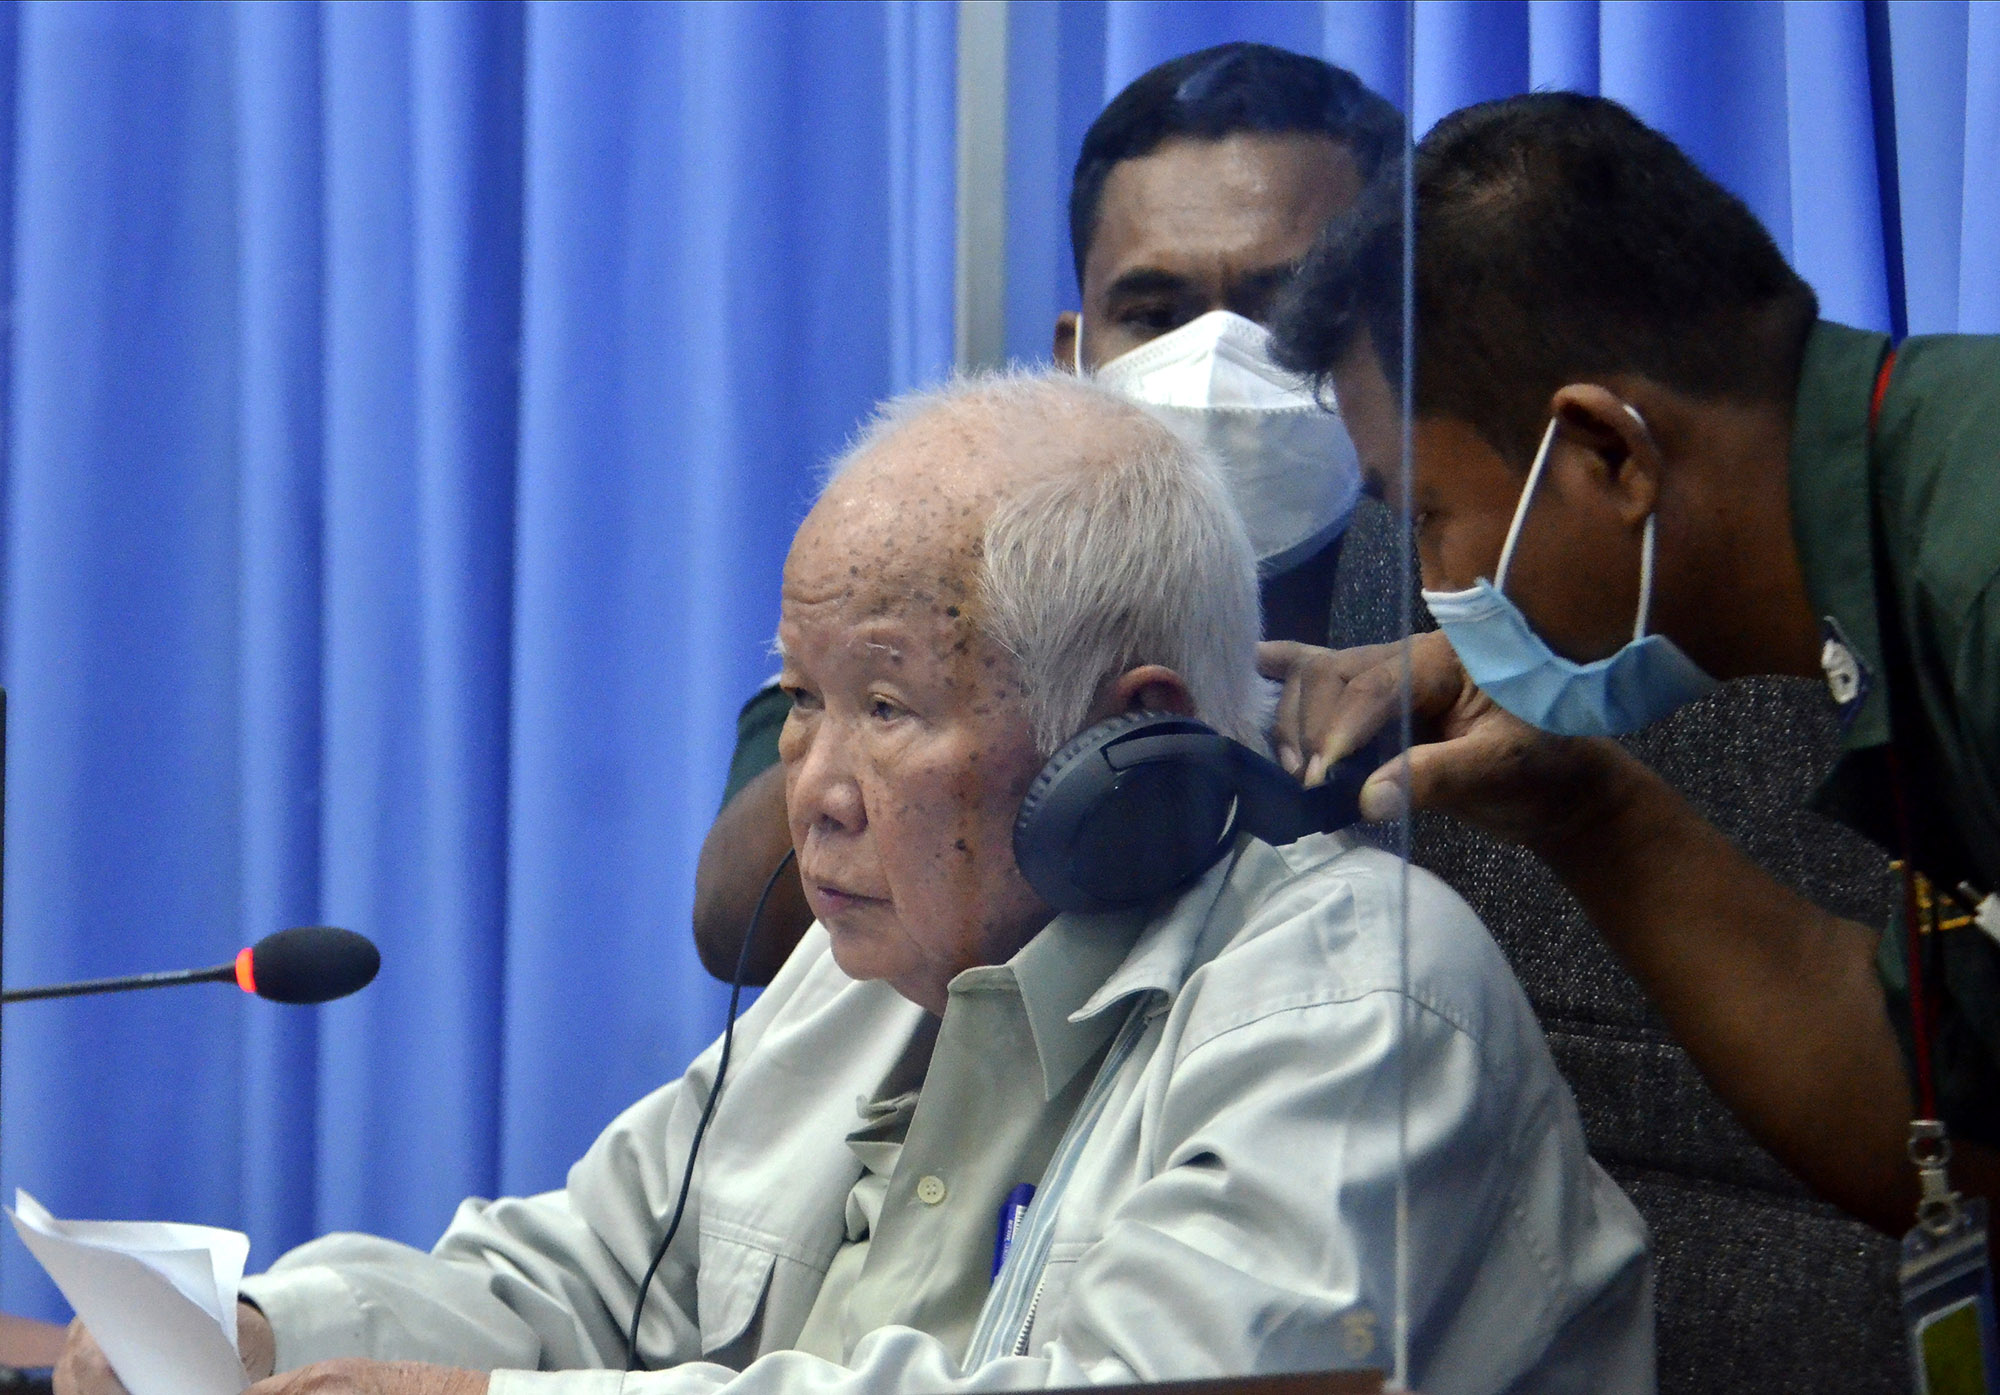 Cambodian Fisting - Khmer Rouge Official on Appeal Denies Complicity in Cambodia Genocide -  Bloomberg